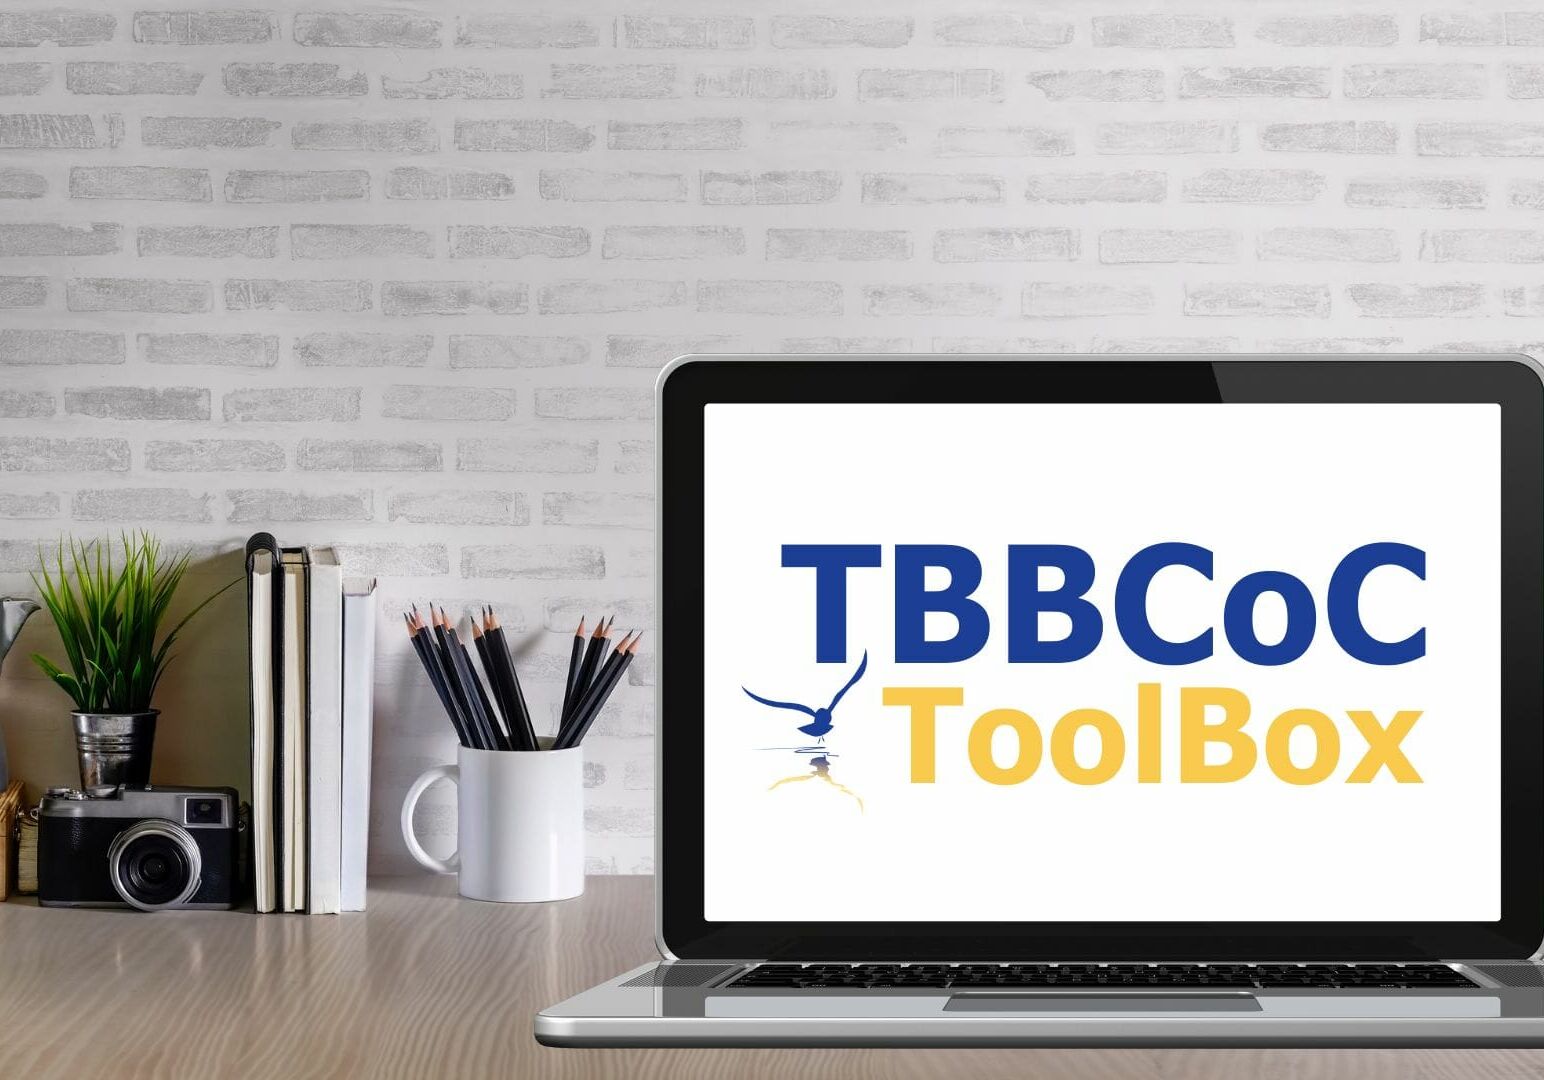 TBBCoC ToolBox Business Listing